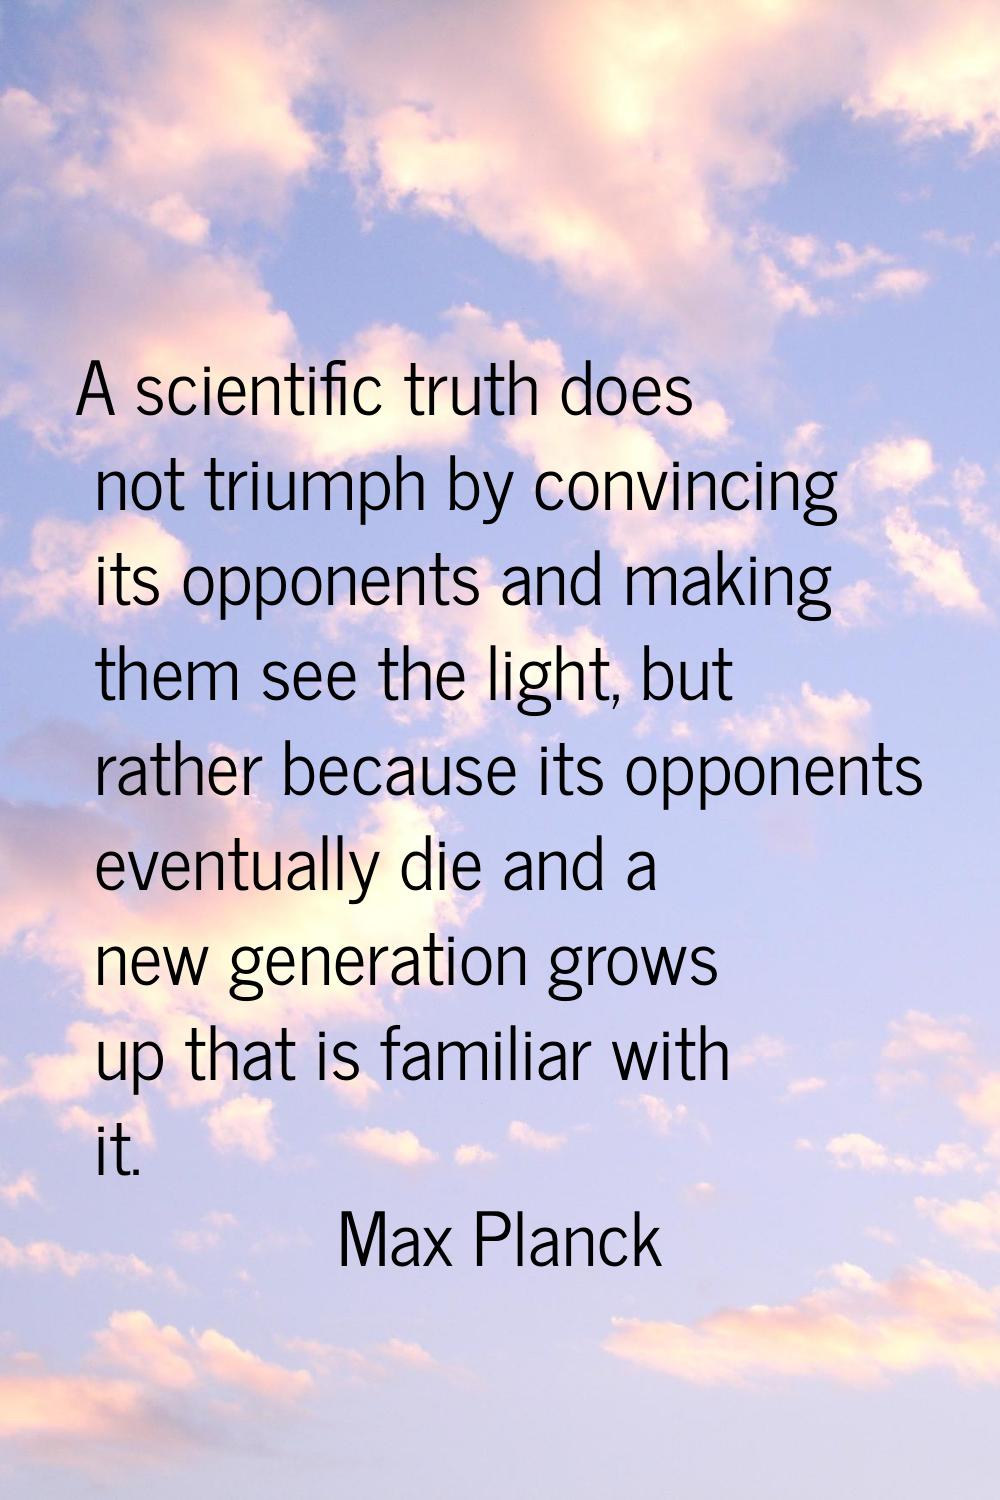 A scientific truth does not triumph by convincing its opponents and making them see the light, but 